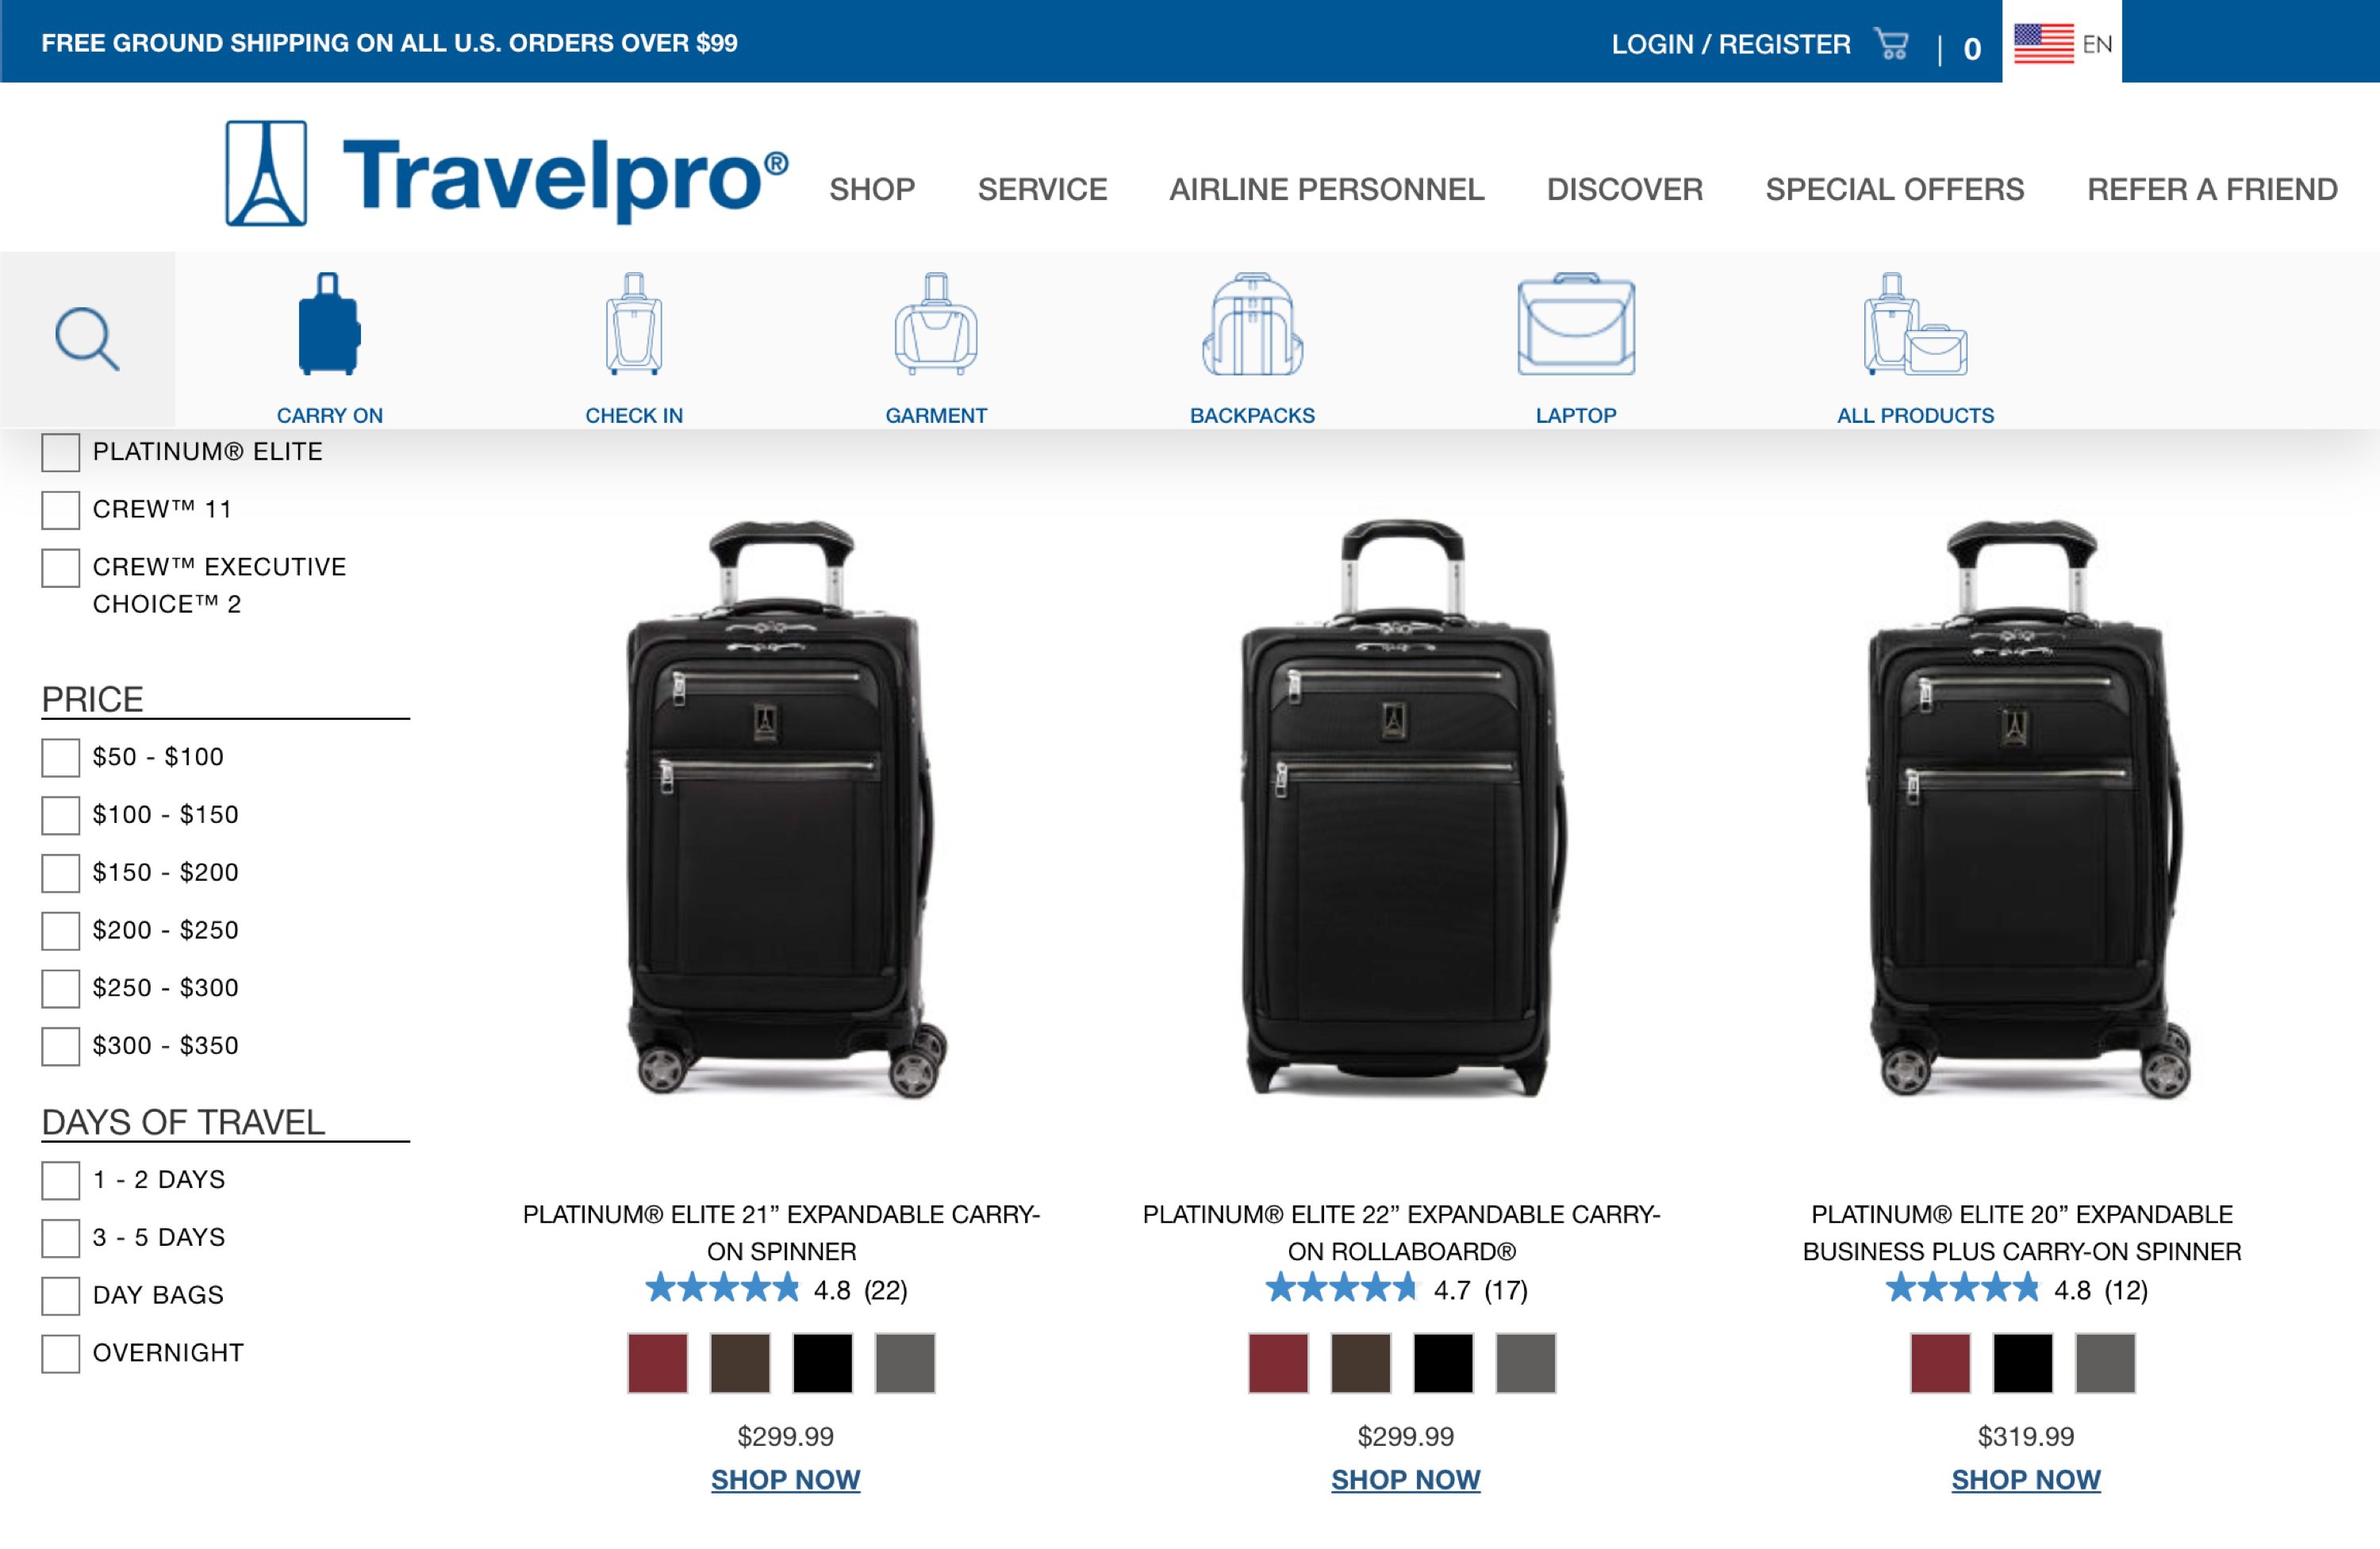 Travelpro.com carry on luggage product listing page.